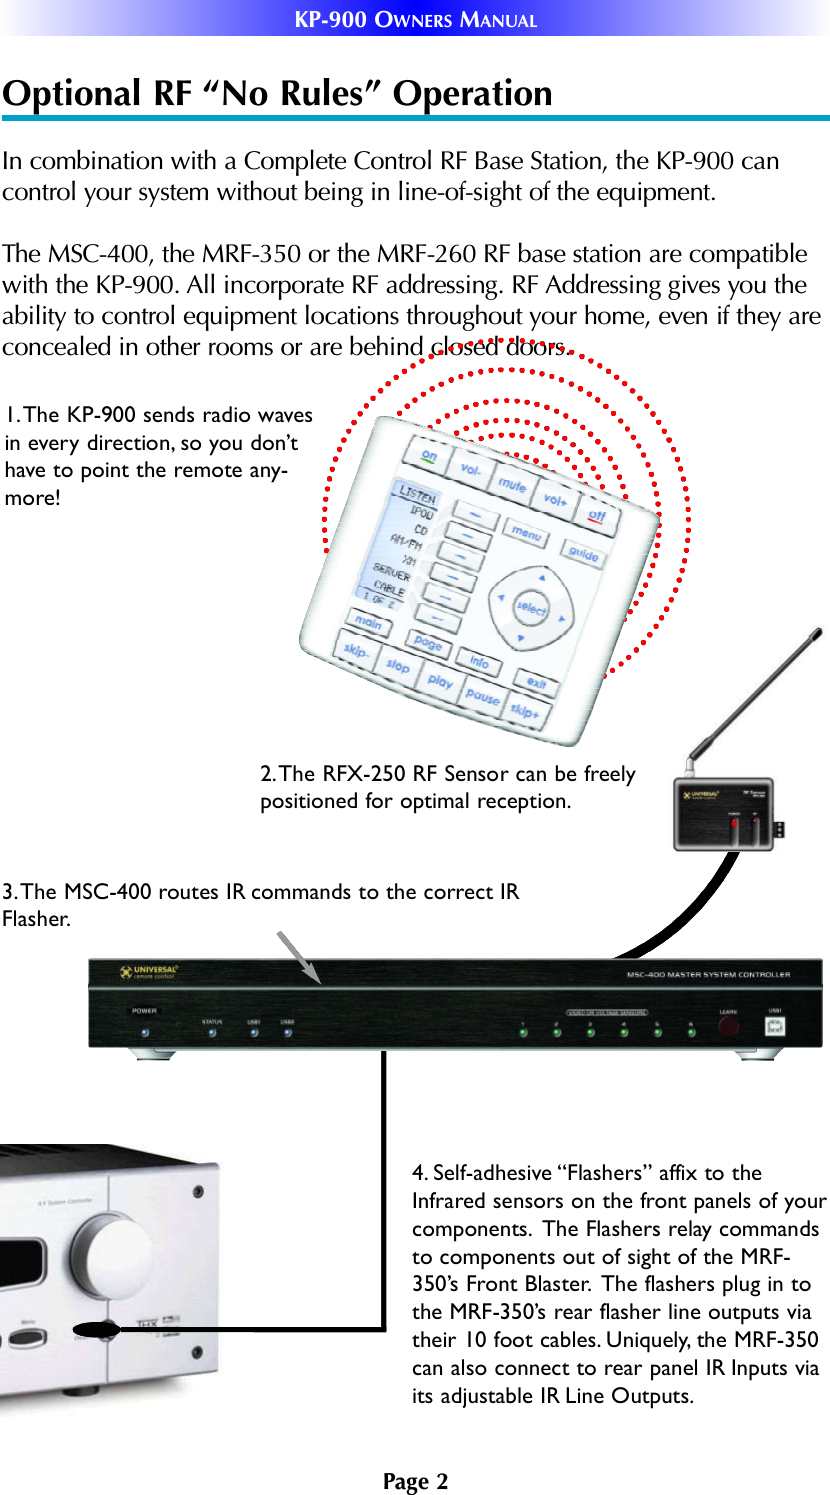 Page 2KP-900 OWNERS MANUALOptional RF “No Rules” OperationIn combination with a Complete Control RF Base Station, the KP-900 cancontrol your system without being in line-of-sight of the equipment. The MSC-400, the MRF-350 or the MRF-260 RF base station are compatiblewith the KP-900. All incorporate RF addressing. RF Addressing gives you theability to control equipment locations throughout your home, even if they areconcealed in other rooms or are behind closed doors.4. Self-adhesive “Flashers” affix to theInfrared sensors on the front panels of yourcomponents.  The Flashers relay commandsto components out of sight of the MRF-350’s Front Blaster.  The flashers plug in tothe MRF-350’s rear flasher line outputs viatheir 10 foot cables. Uniquely, the MRF-350can also connect to rear panel IR Inputs viaits adjustable IR Line Outputs.3. The MSC-400 routes IR commands to the correct IRFlasher.1. The KP-900 sends radio wavesin every direction, so you don’thave to point the remote any-more! 2. The RFX-250 RF Sensor can be freelypositioned for optimal reception.